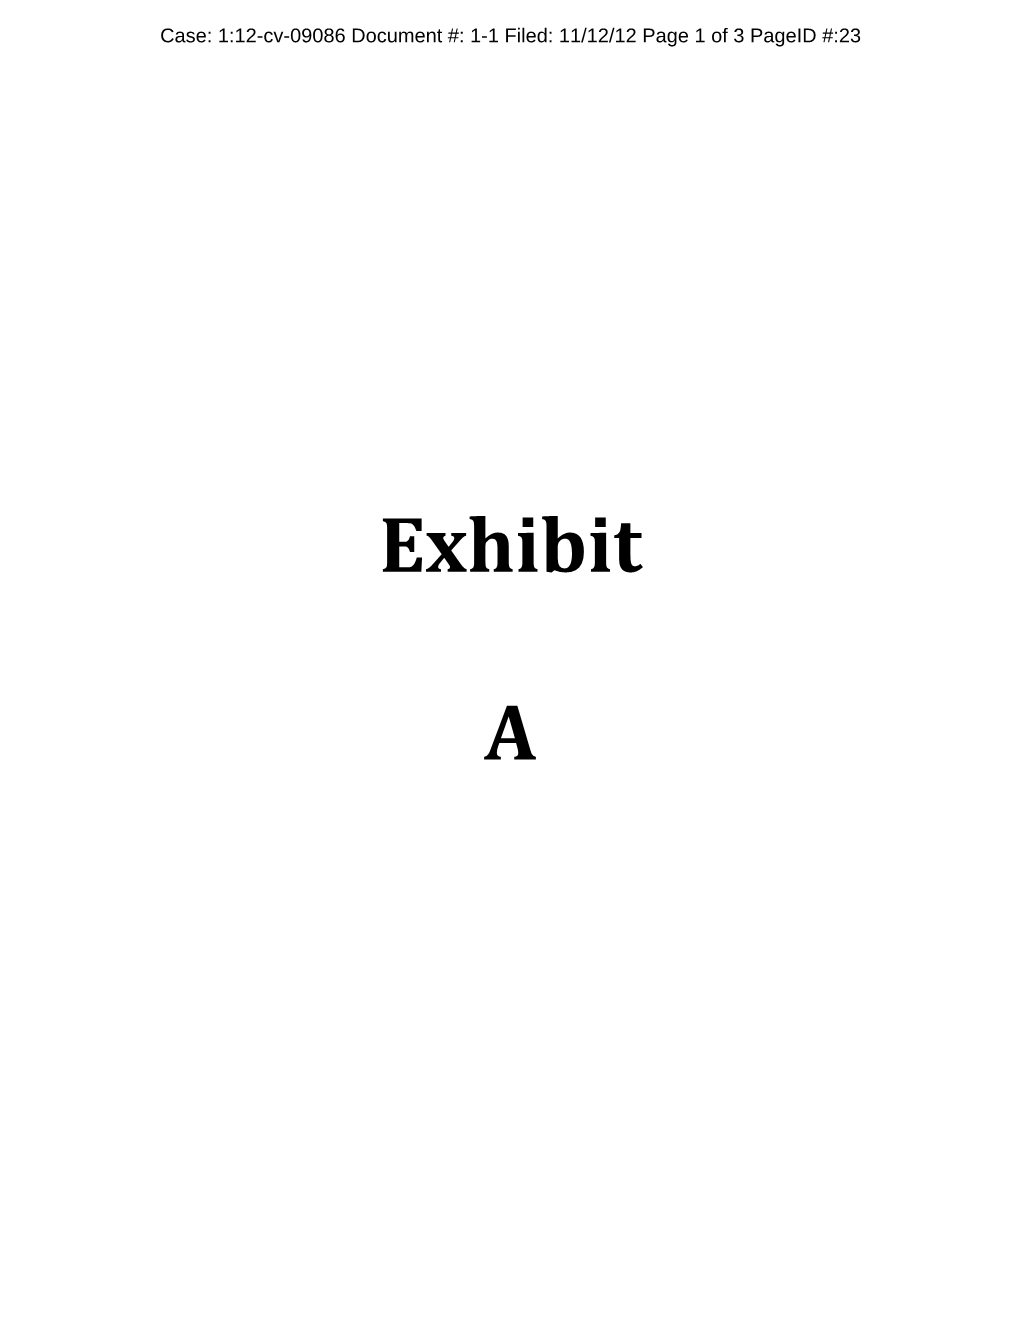 ! ! ! ! Exhibit! ! A! Case: 1:12-Cv-09086 Document #: 1-1 Filed: 11/12/12 Page 2 of 3 Pageid #:24